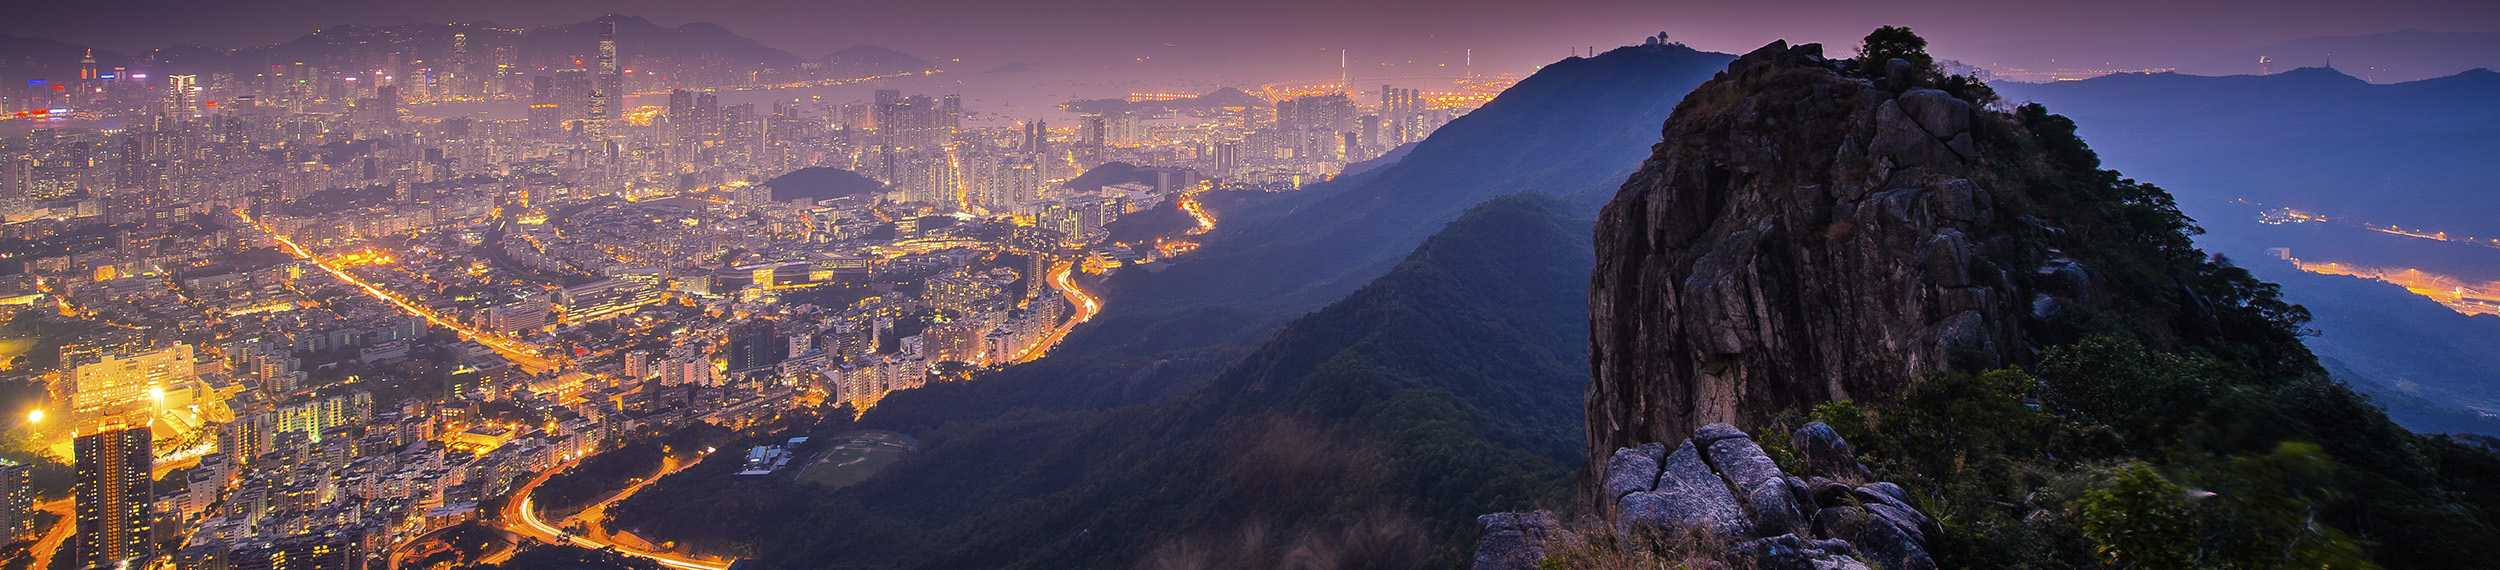 View from above of Lion Rock and Kowloon in Hong Kong.